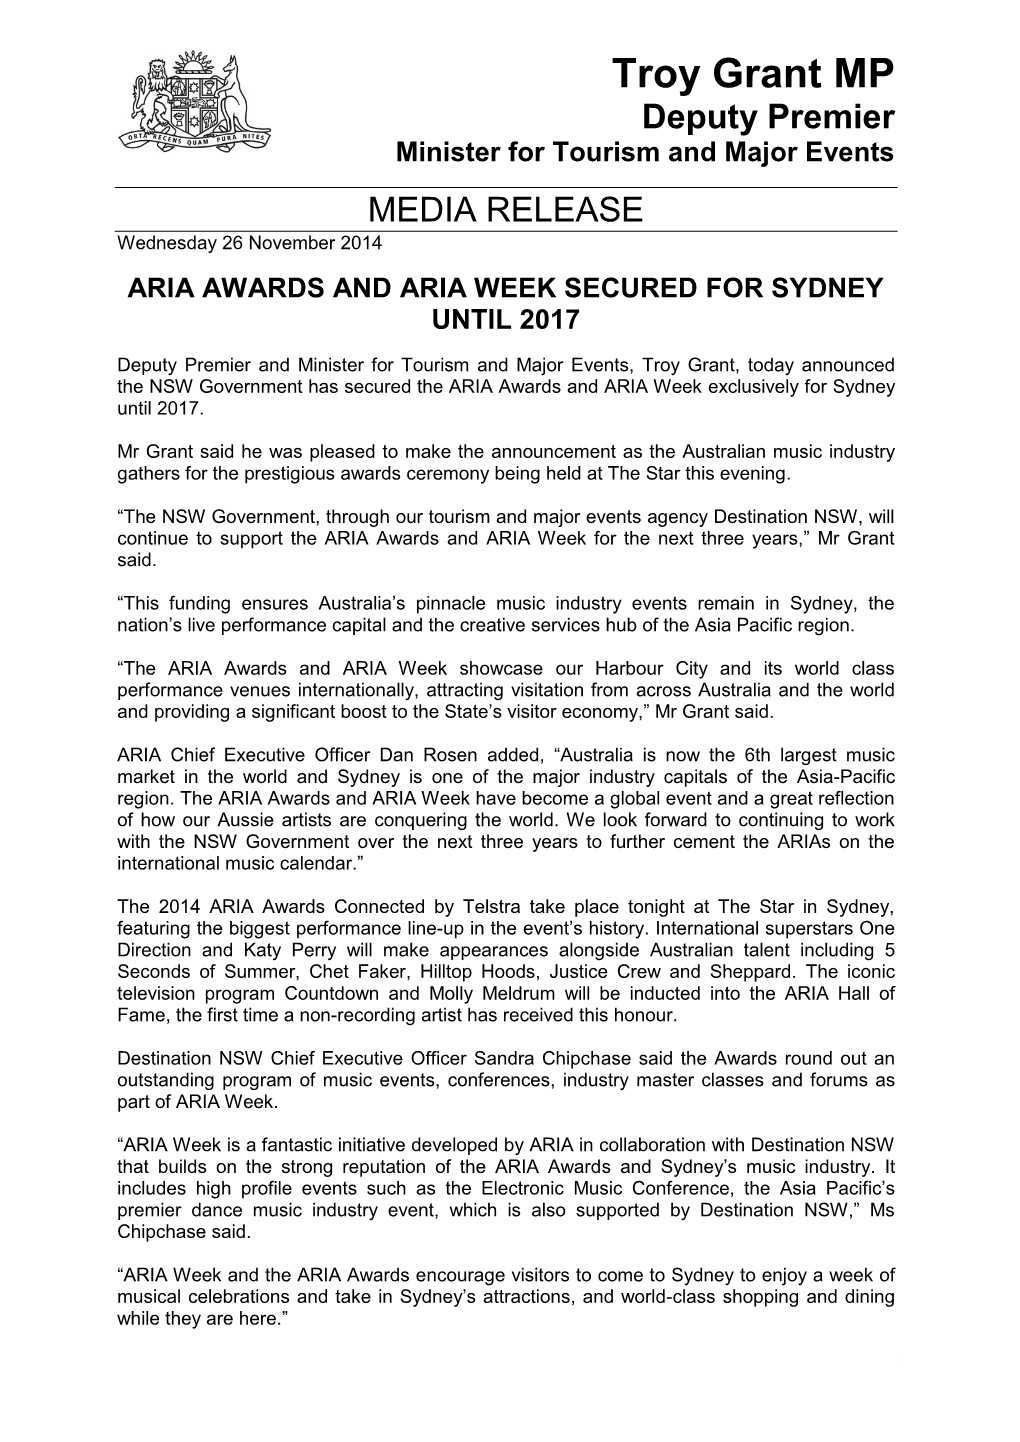 Aria Awards and Aria Week Secured for Sydney Until 2017